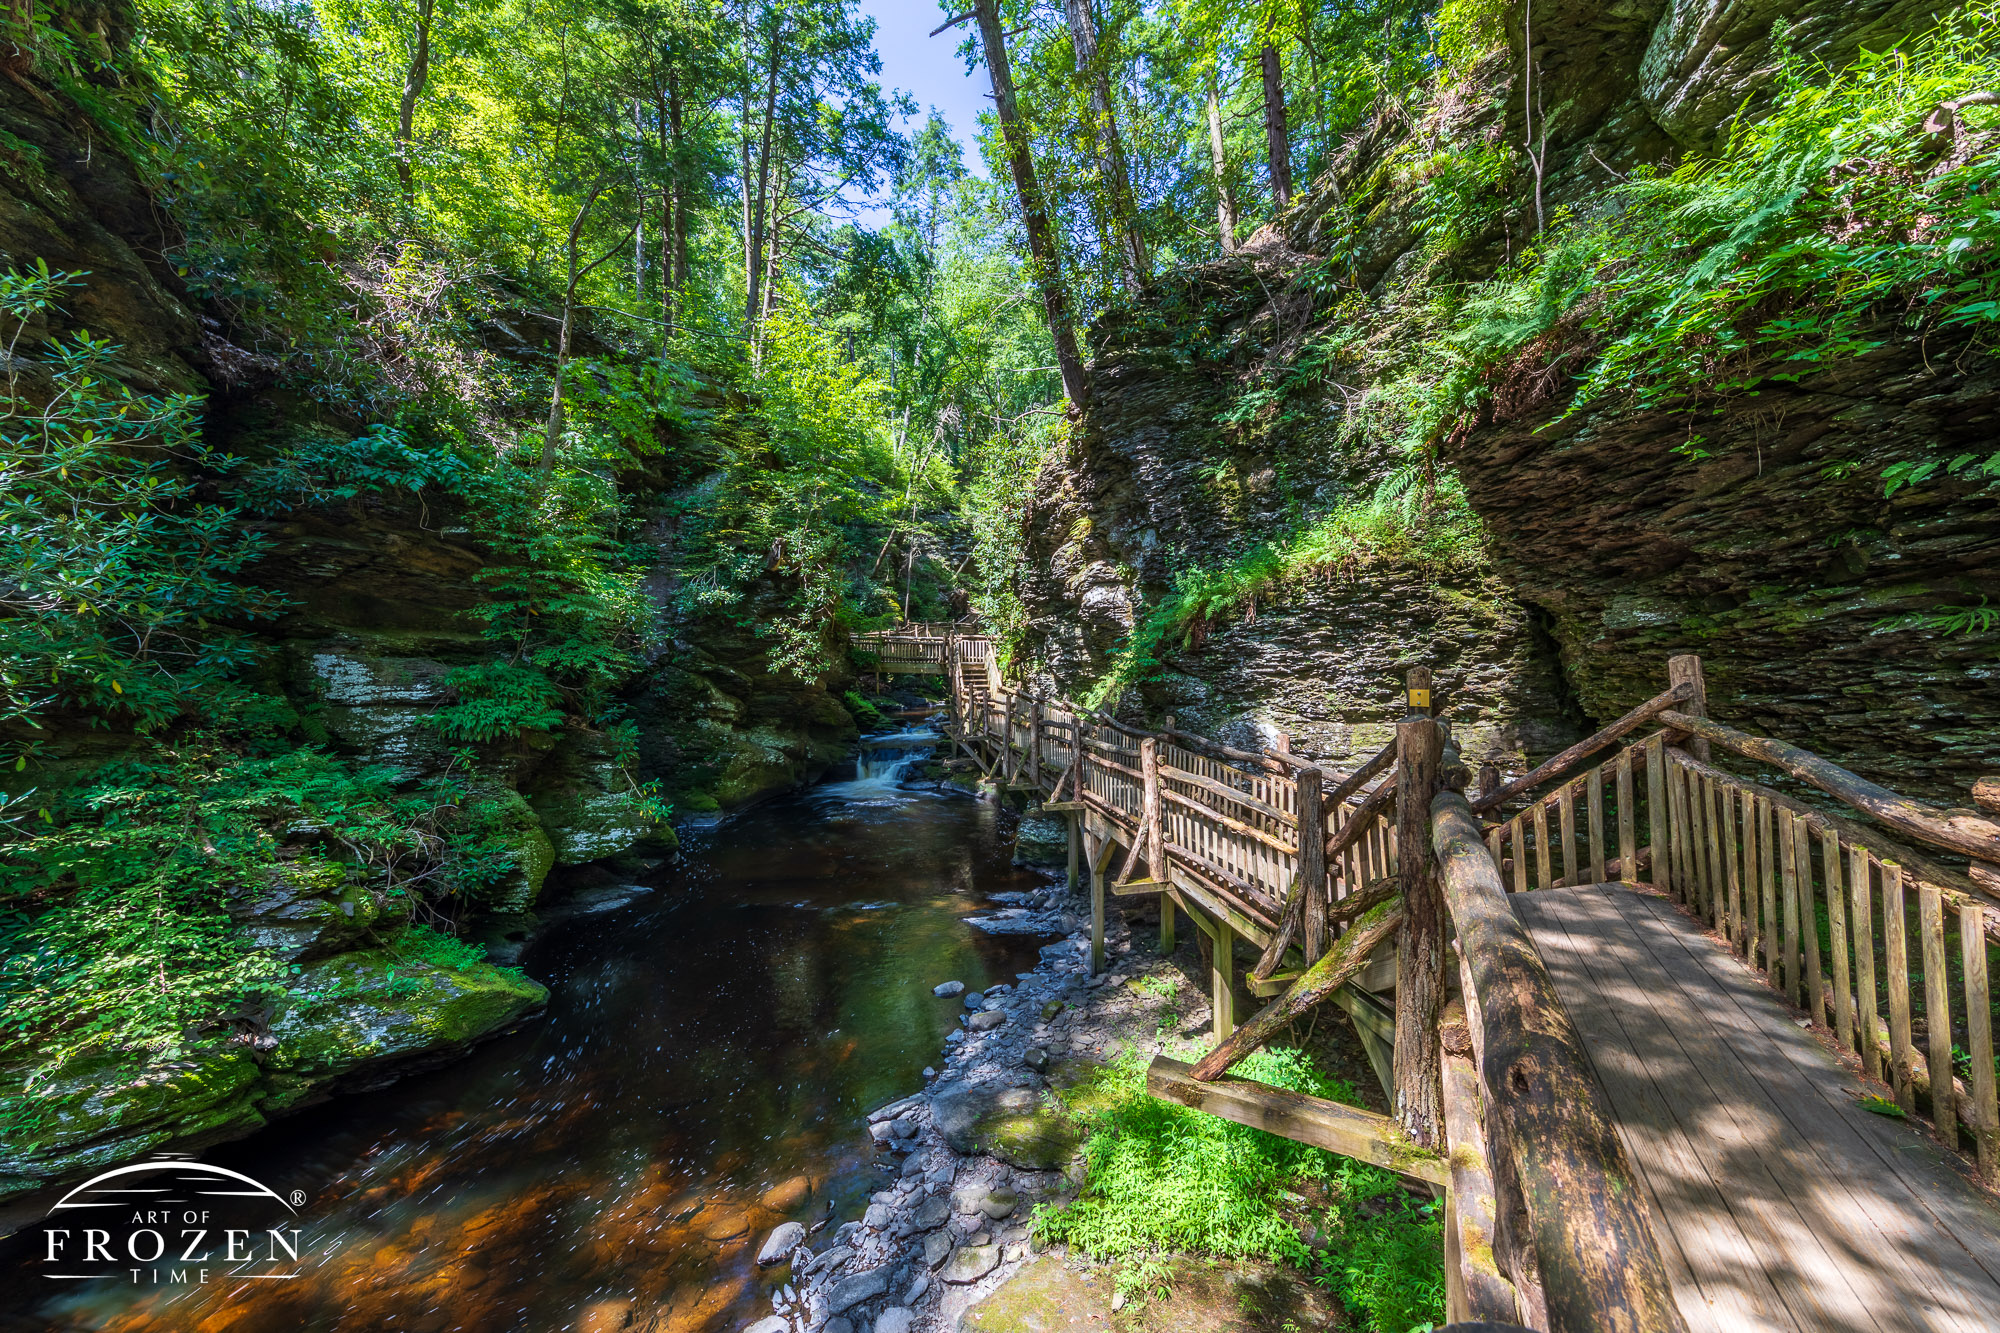 A woodend walkway built along a small gorge which safely guides visitors along a stream.